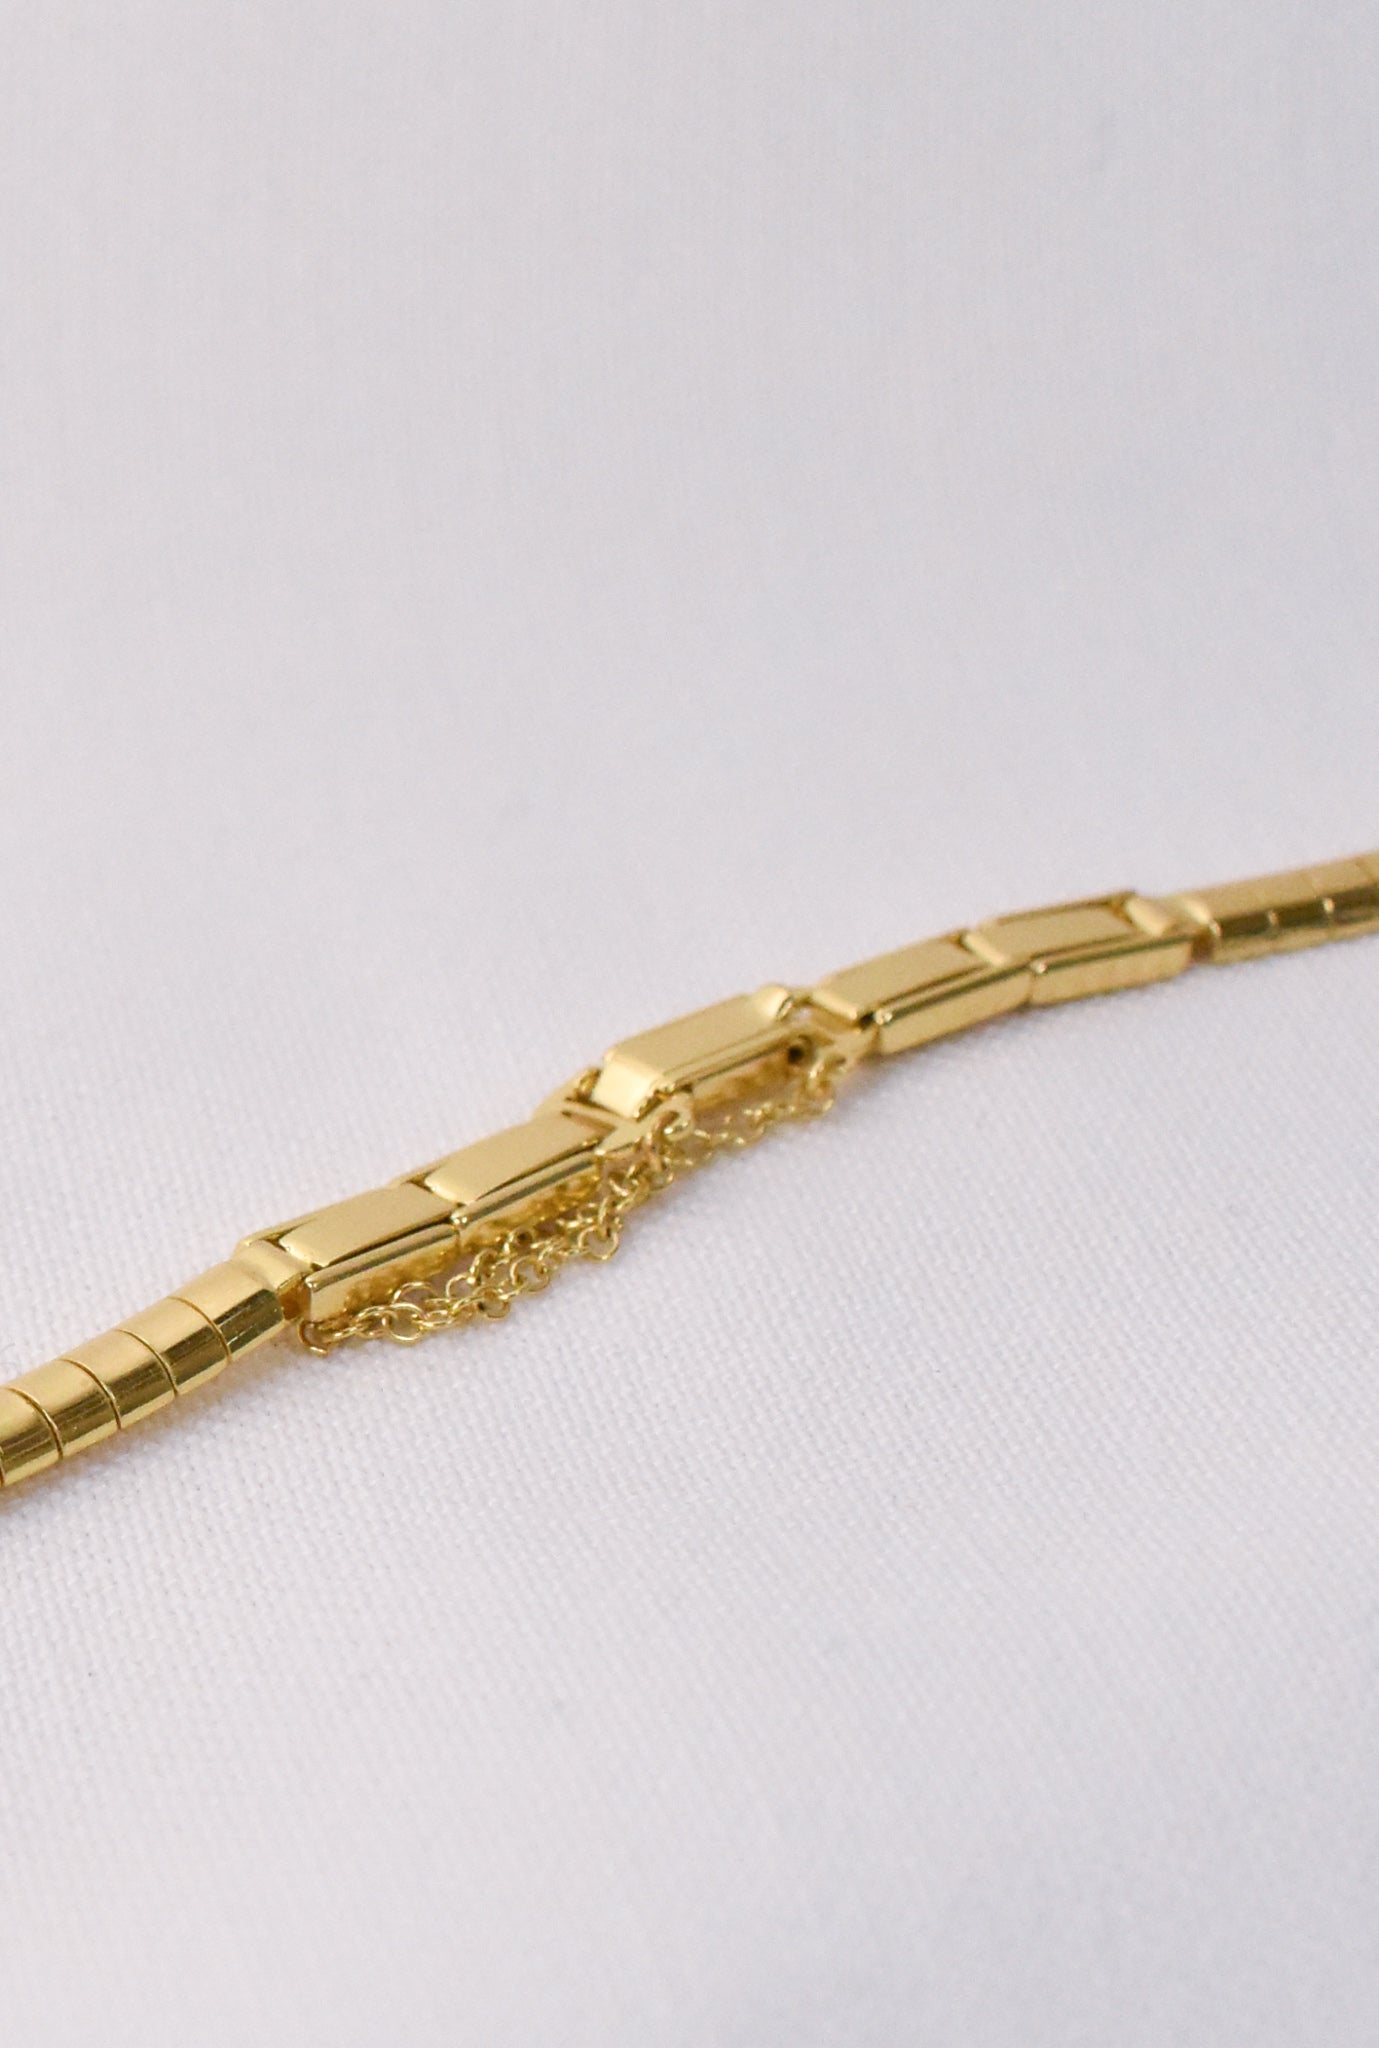 German vintage gold plated watch band